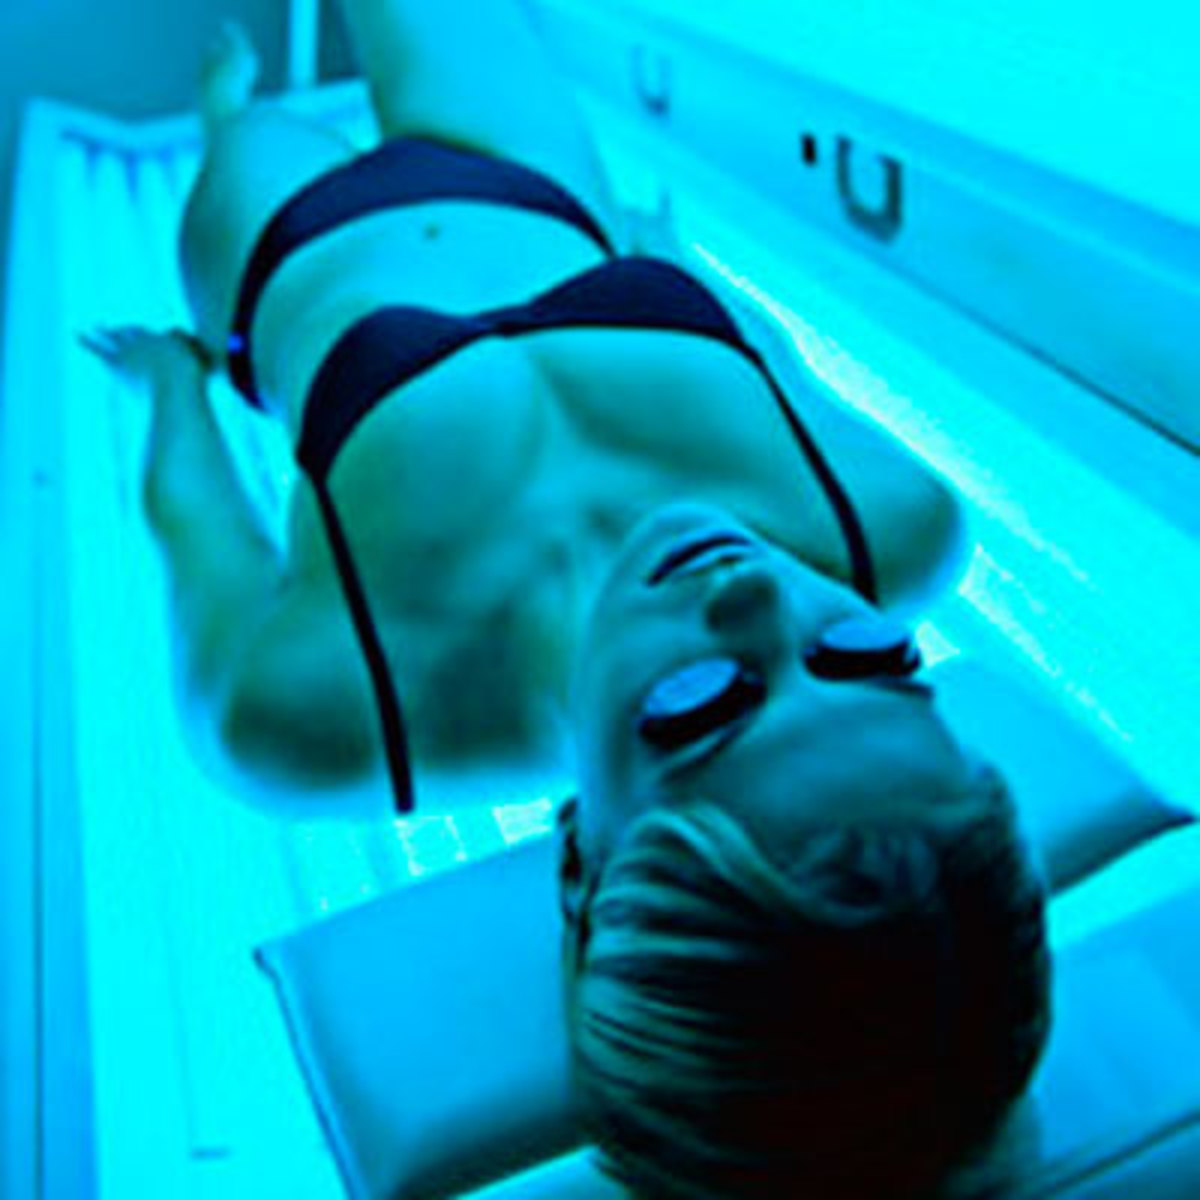 Tanning Bed 101: A Beginner's Guide